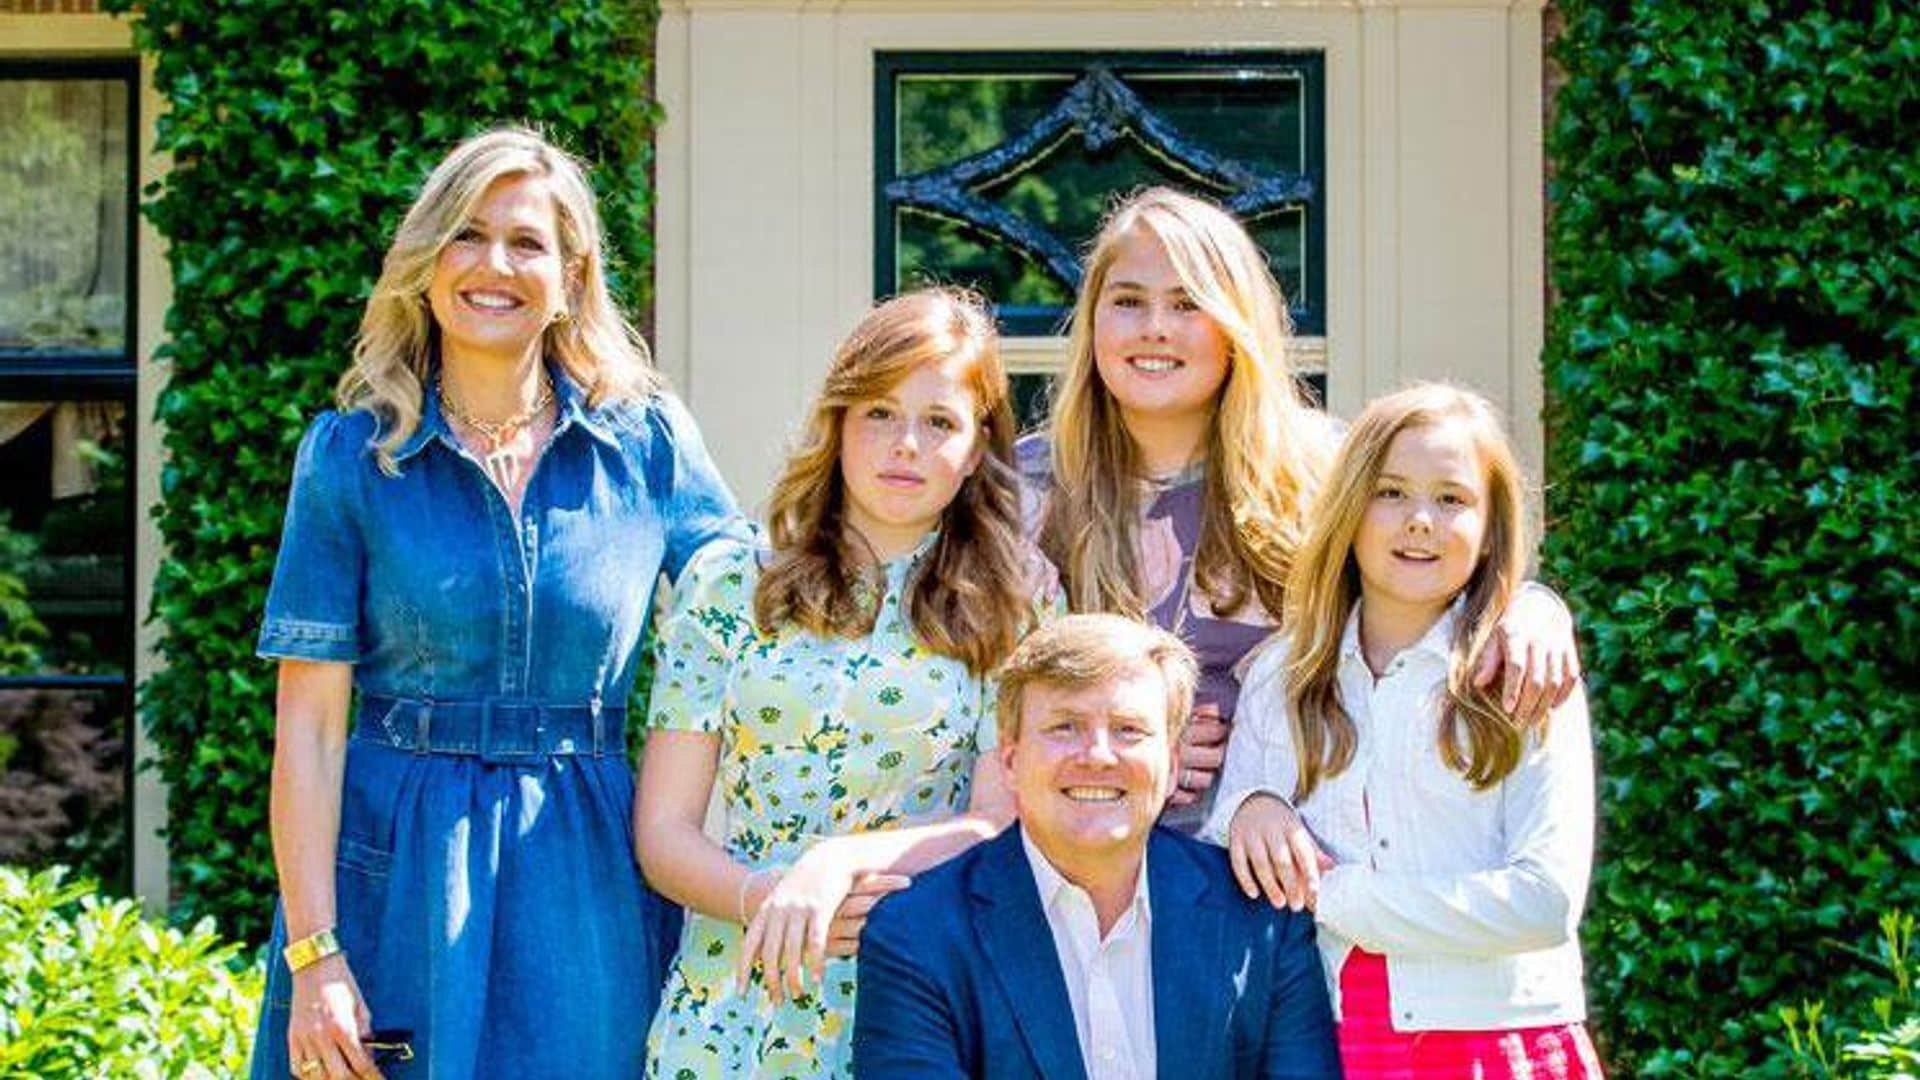 Queen Maxima opens the doors of her new family home: Take a look inside